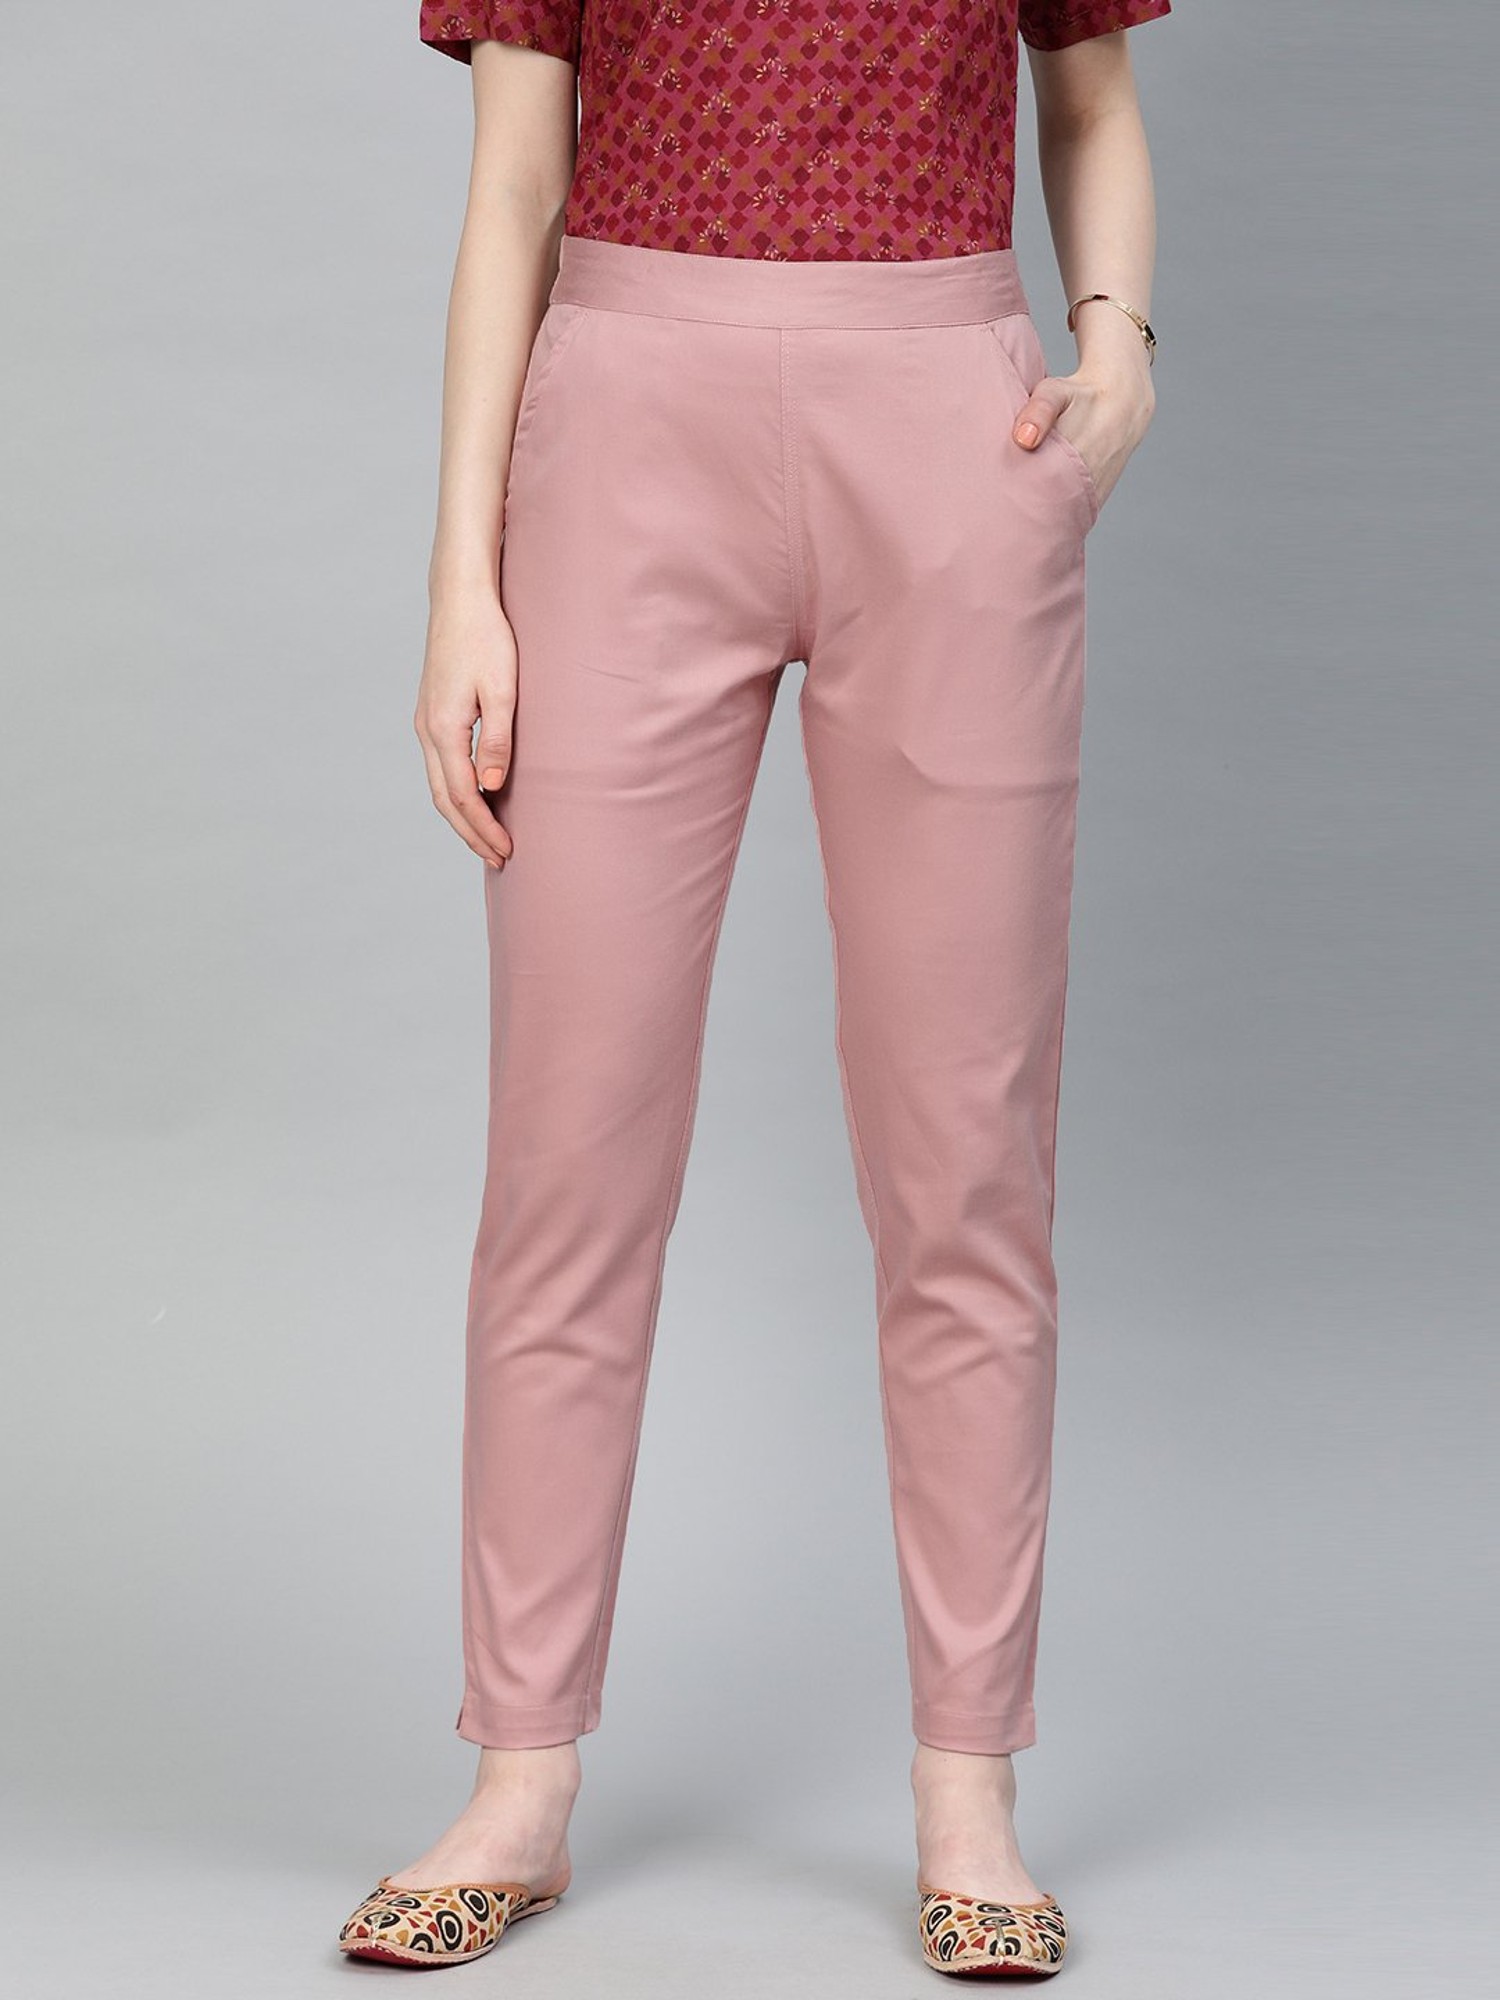 12 ways to wear my favorite pink pants These pants have an amazing elastic  waist and they can be worn  Pink pants outfit Light pink pants Colored  pants outfits